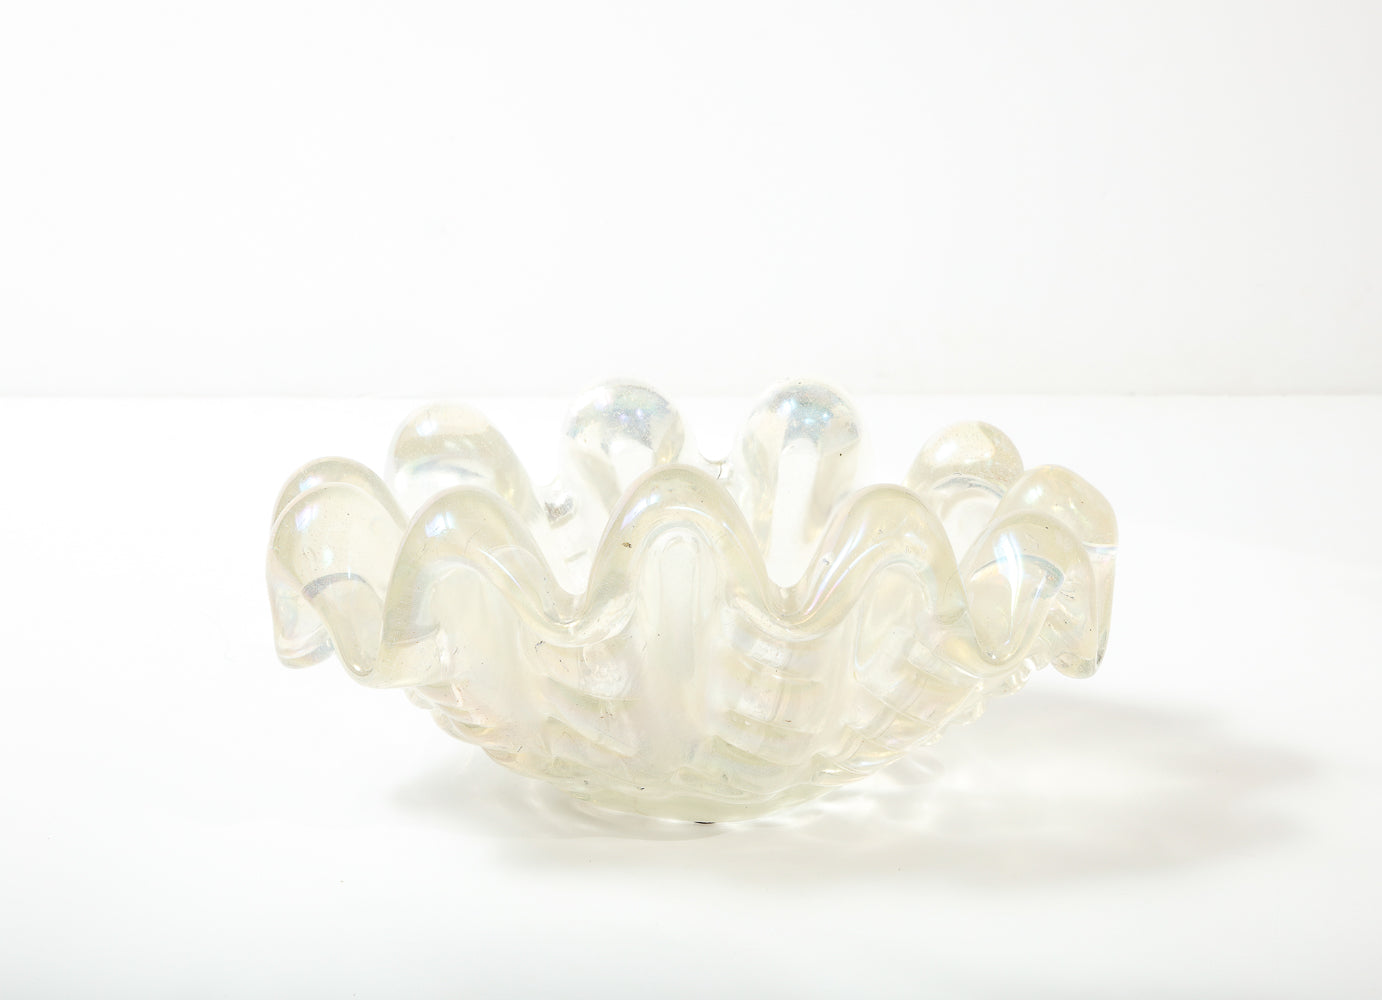 Large- Scale Grosse Costolature Bowl by Ercole Barovier